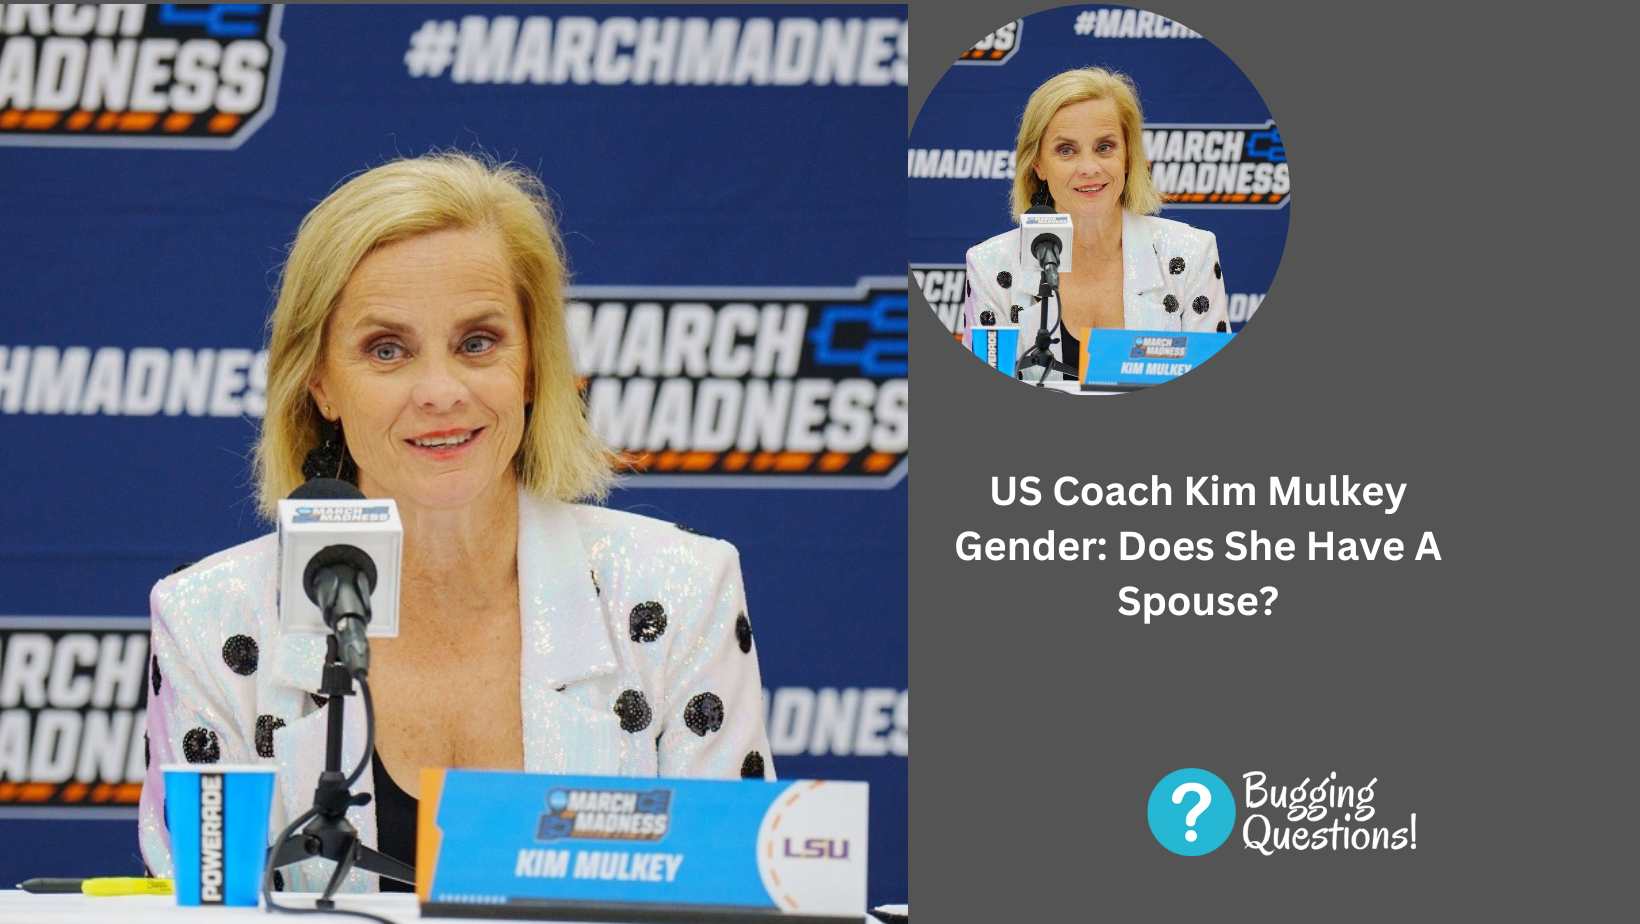 US Coach Kim Mulkey Gender: Does She Have A Spouse?